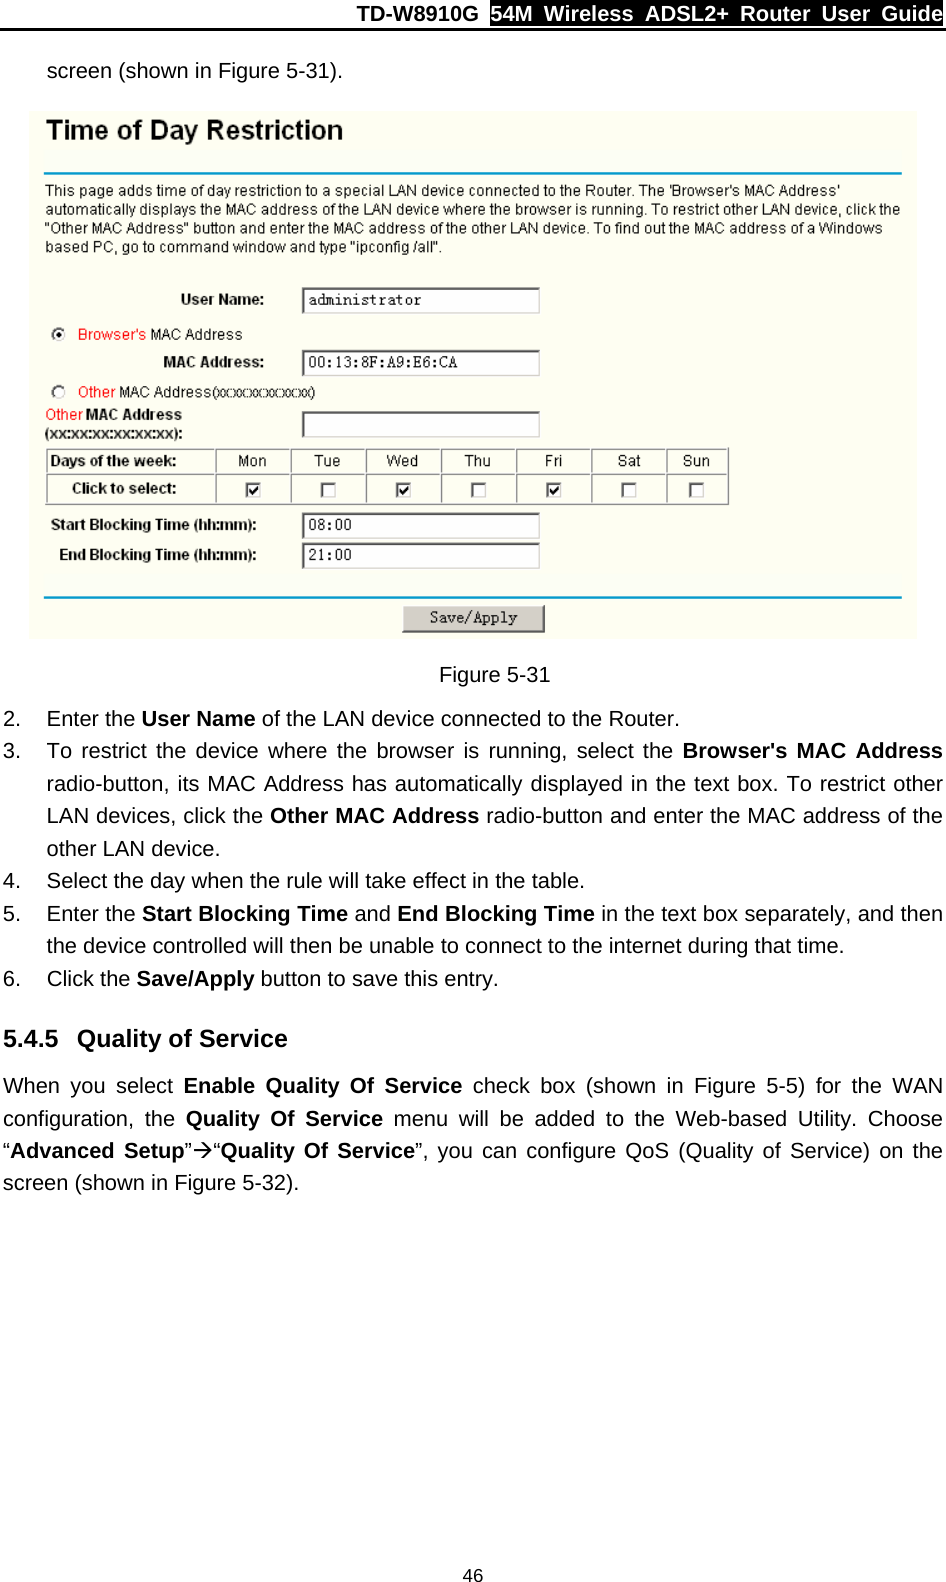 TD-W8910G  54M Wireless ADSL2+ Router User Guide  46screen (shown in Figure 5-31).  Figure 5-31 2. Enter the User Name of the LAN device connected to the Router. 3.  To restrict the device where the browser is running, select the Browser&apos;s MAC Address radio-button, its MAC Address has automatically displayed in the text box. To restrict other LAN devices, click the Other MAC Address radio-button and enter the MAC address of the other LAN device. 4.  Select the day when the rule will take effect in the table. 5. Enter the Start Blocking Time and End Blocking Time in the text box separately, and then the device controlled will then be unable to connect to the internet during that time. 6. Click the Save/Apply button to save this entry. 5.4.5  Quality of Service When you select Enable Quality Of Service check box (shown in Figure 5-5) for the WAN configuration, the Quality Of Service menu will be added to the Web-based Utility. Choose “Advanced Setup”Æ“Quality Of Service”, you can configure QoS (Quality of Service) on the screen (shown in Figure 5-32). 